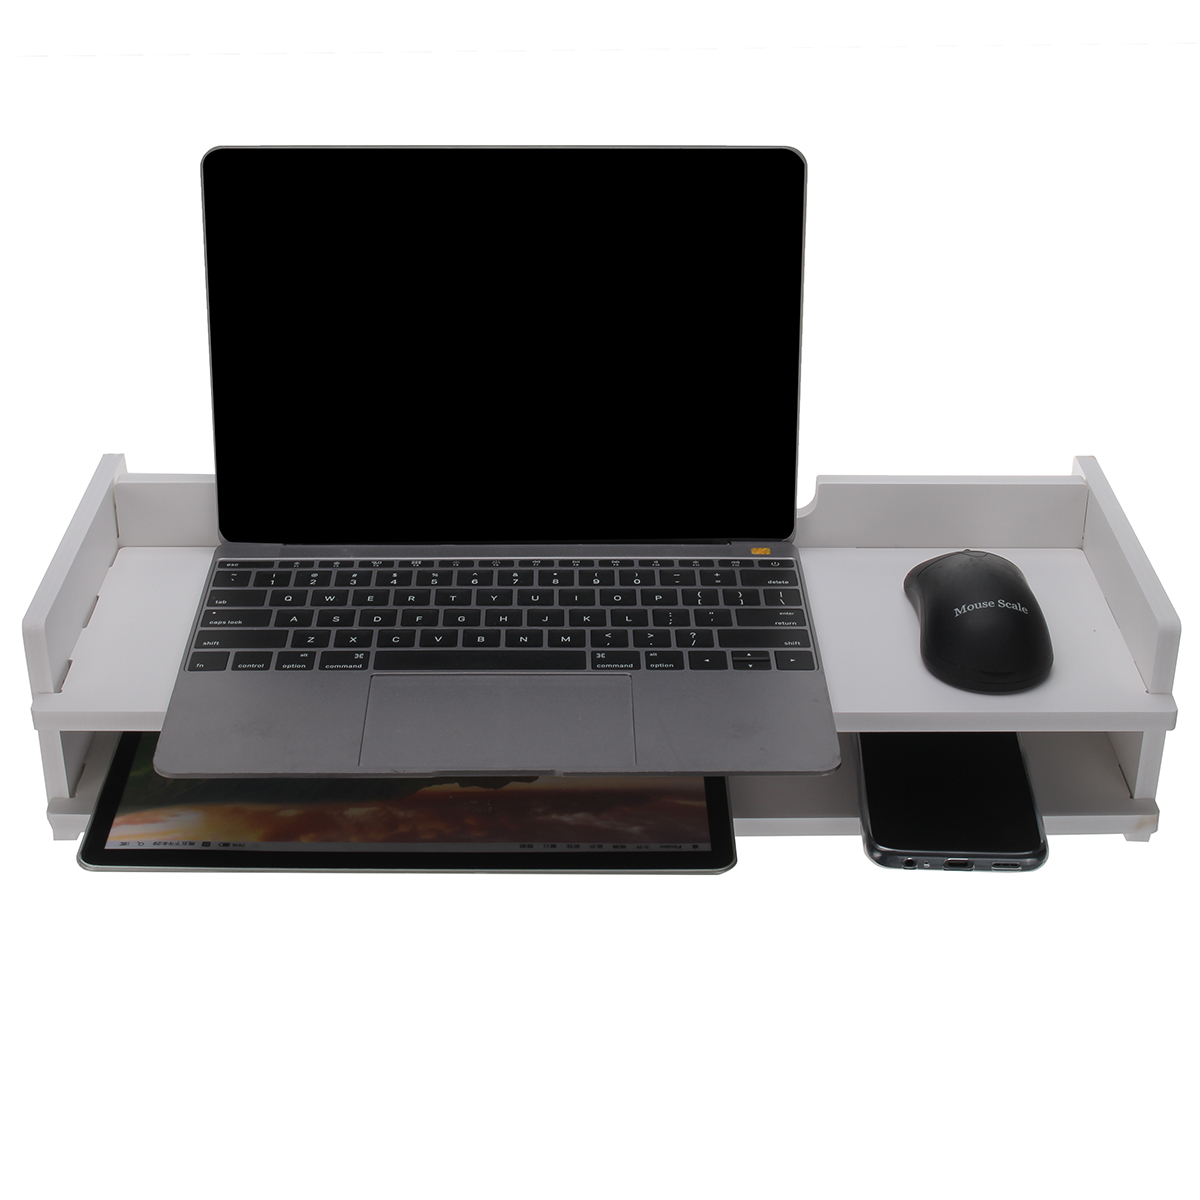 Monitor-Stand-Riser-with-Storage-Organizer-Desktop-Stand-for-Laptop-Computer-Desk-Stand-with-Phone-H-1909309-9